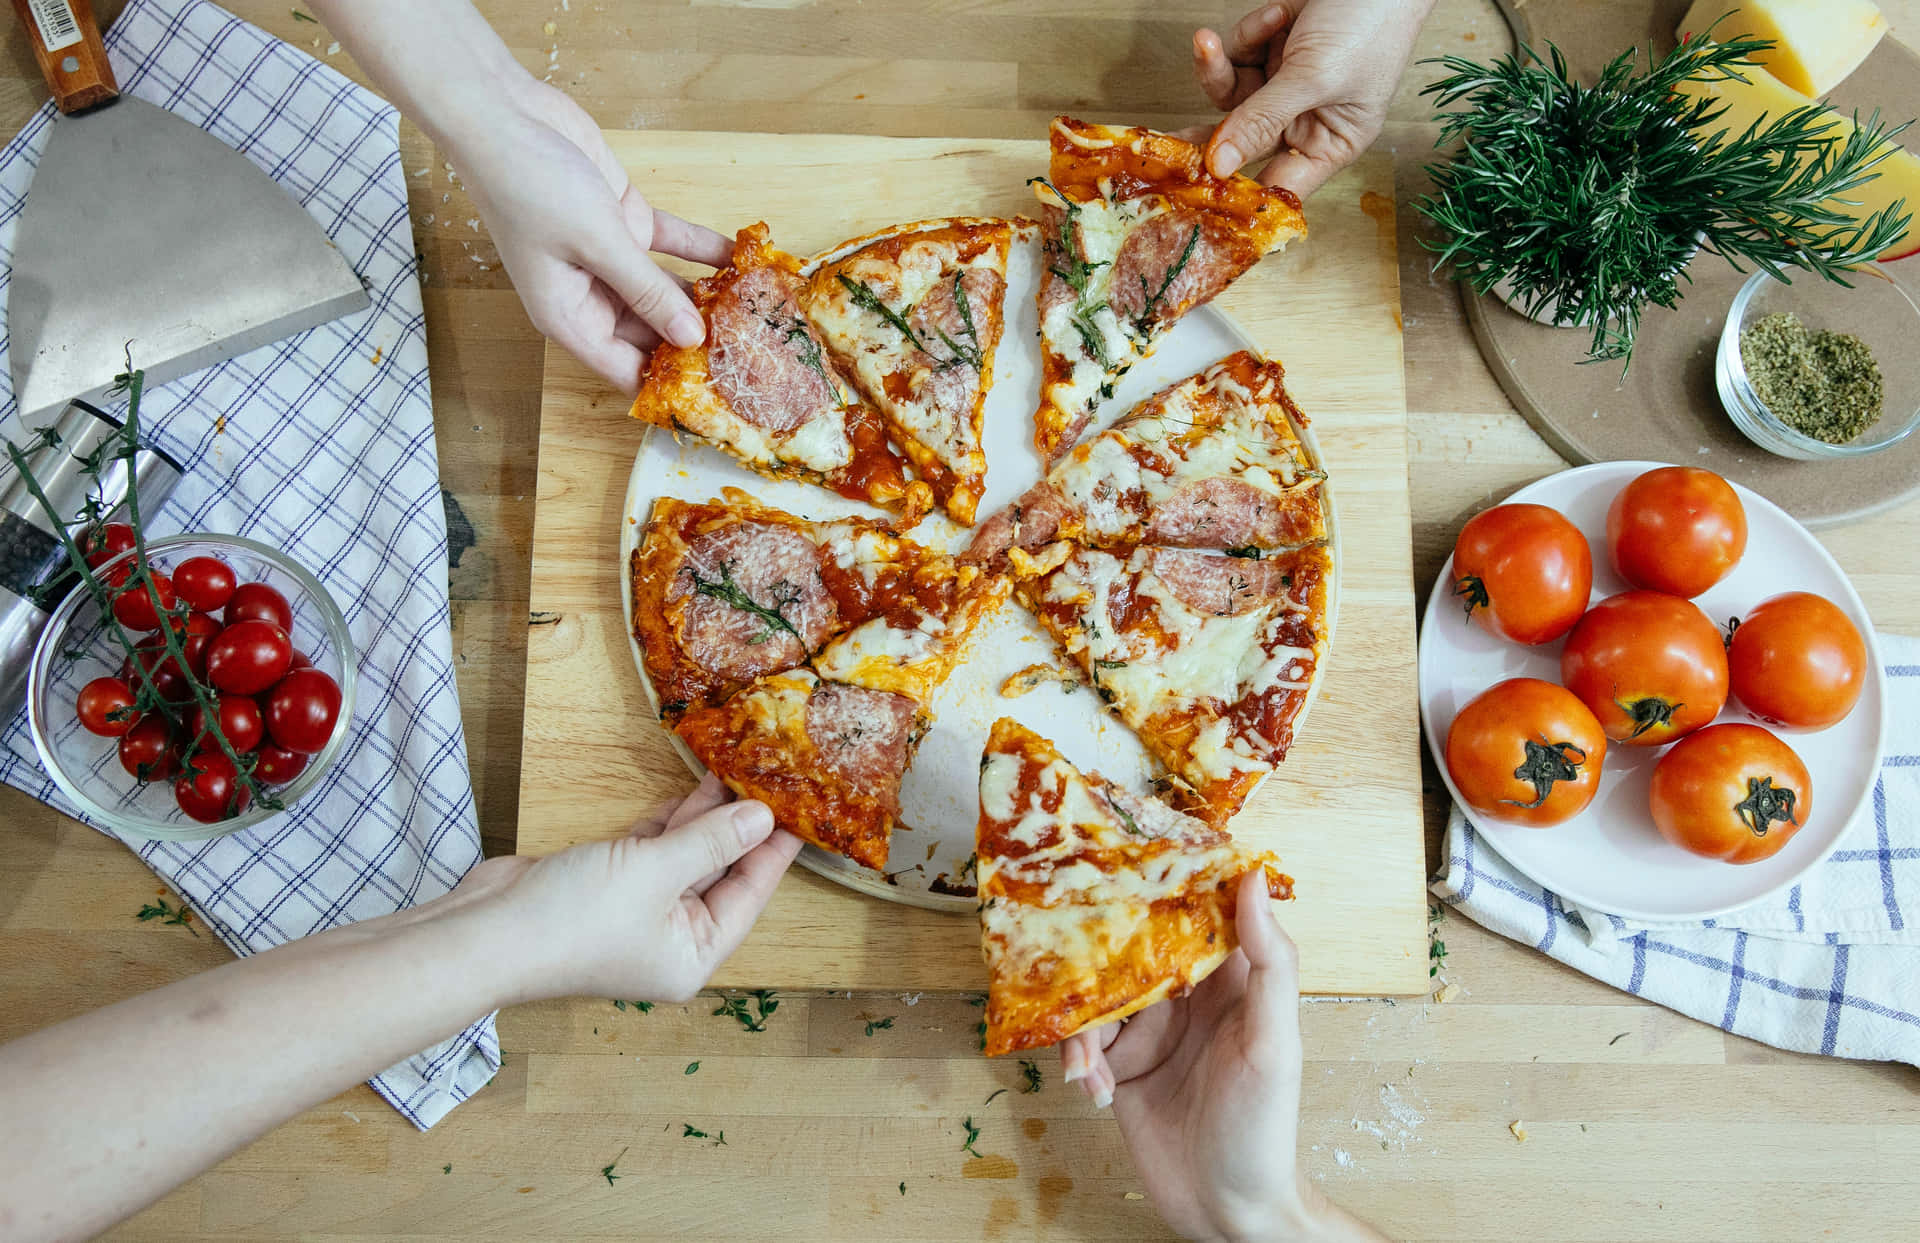 Get the perfect pizza every time with Pizza Hut